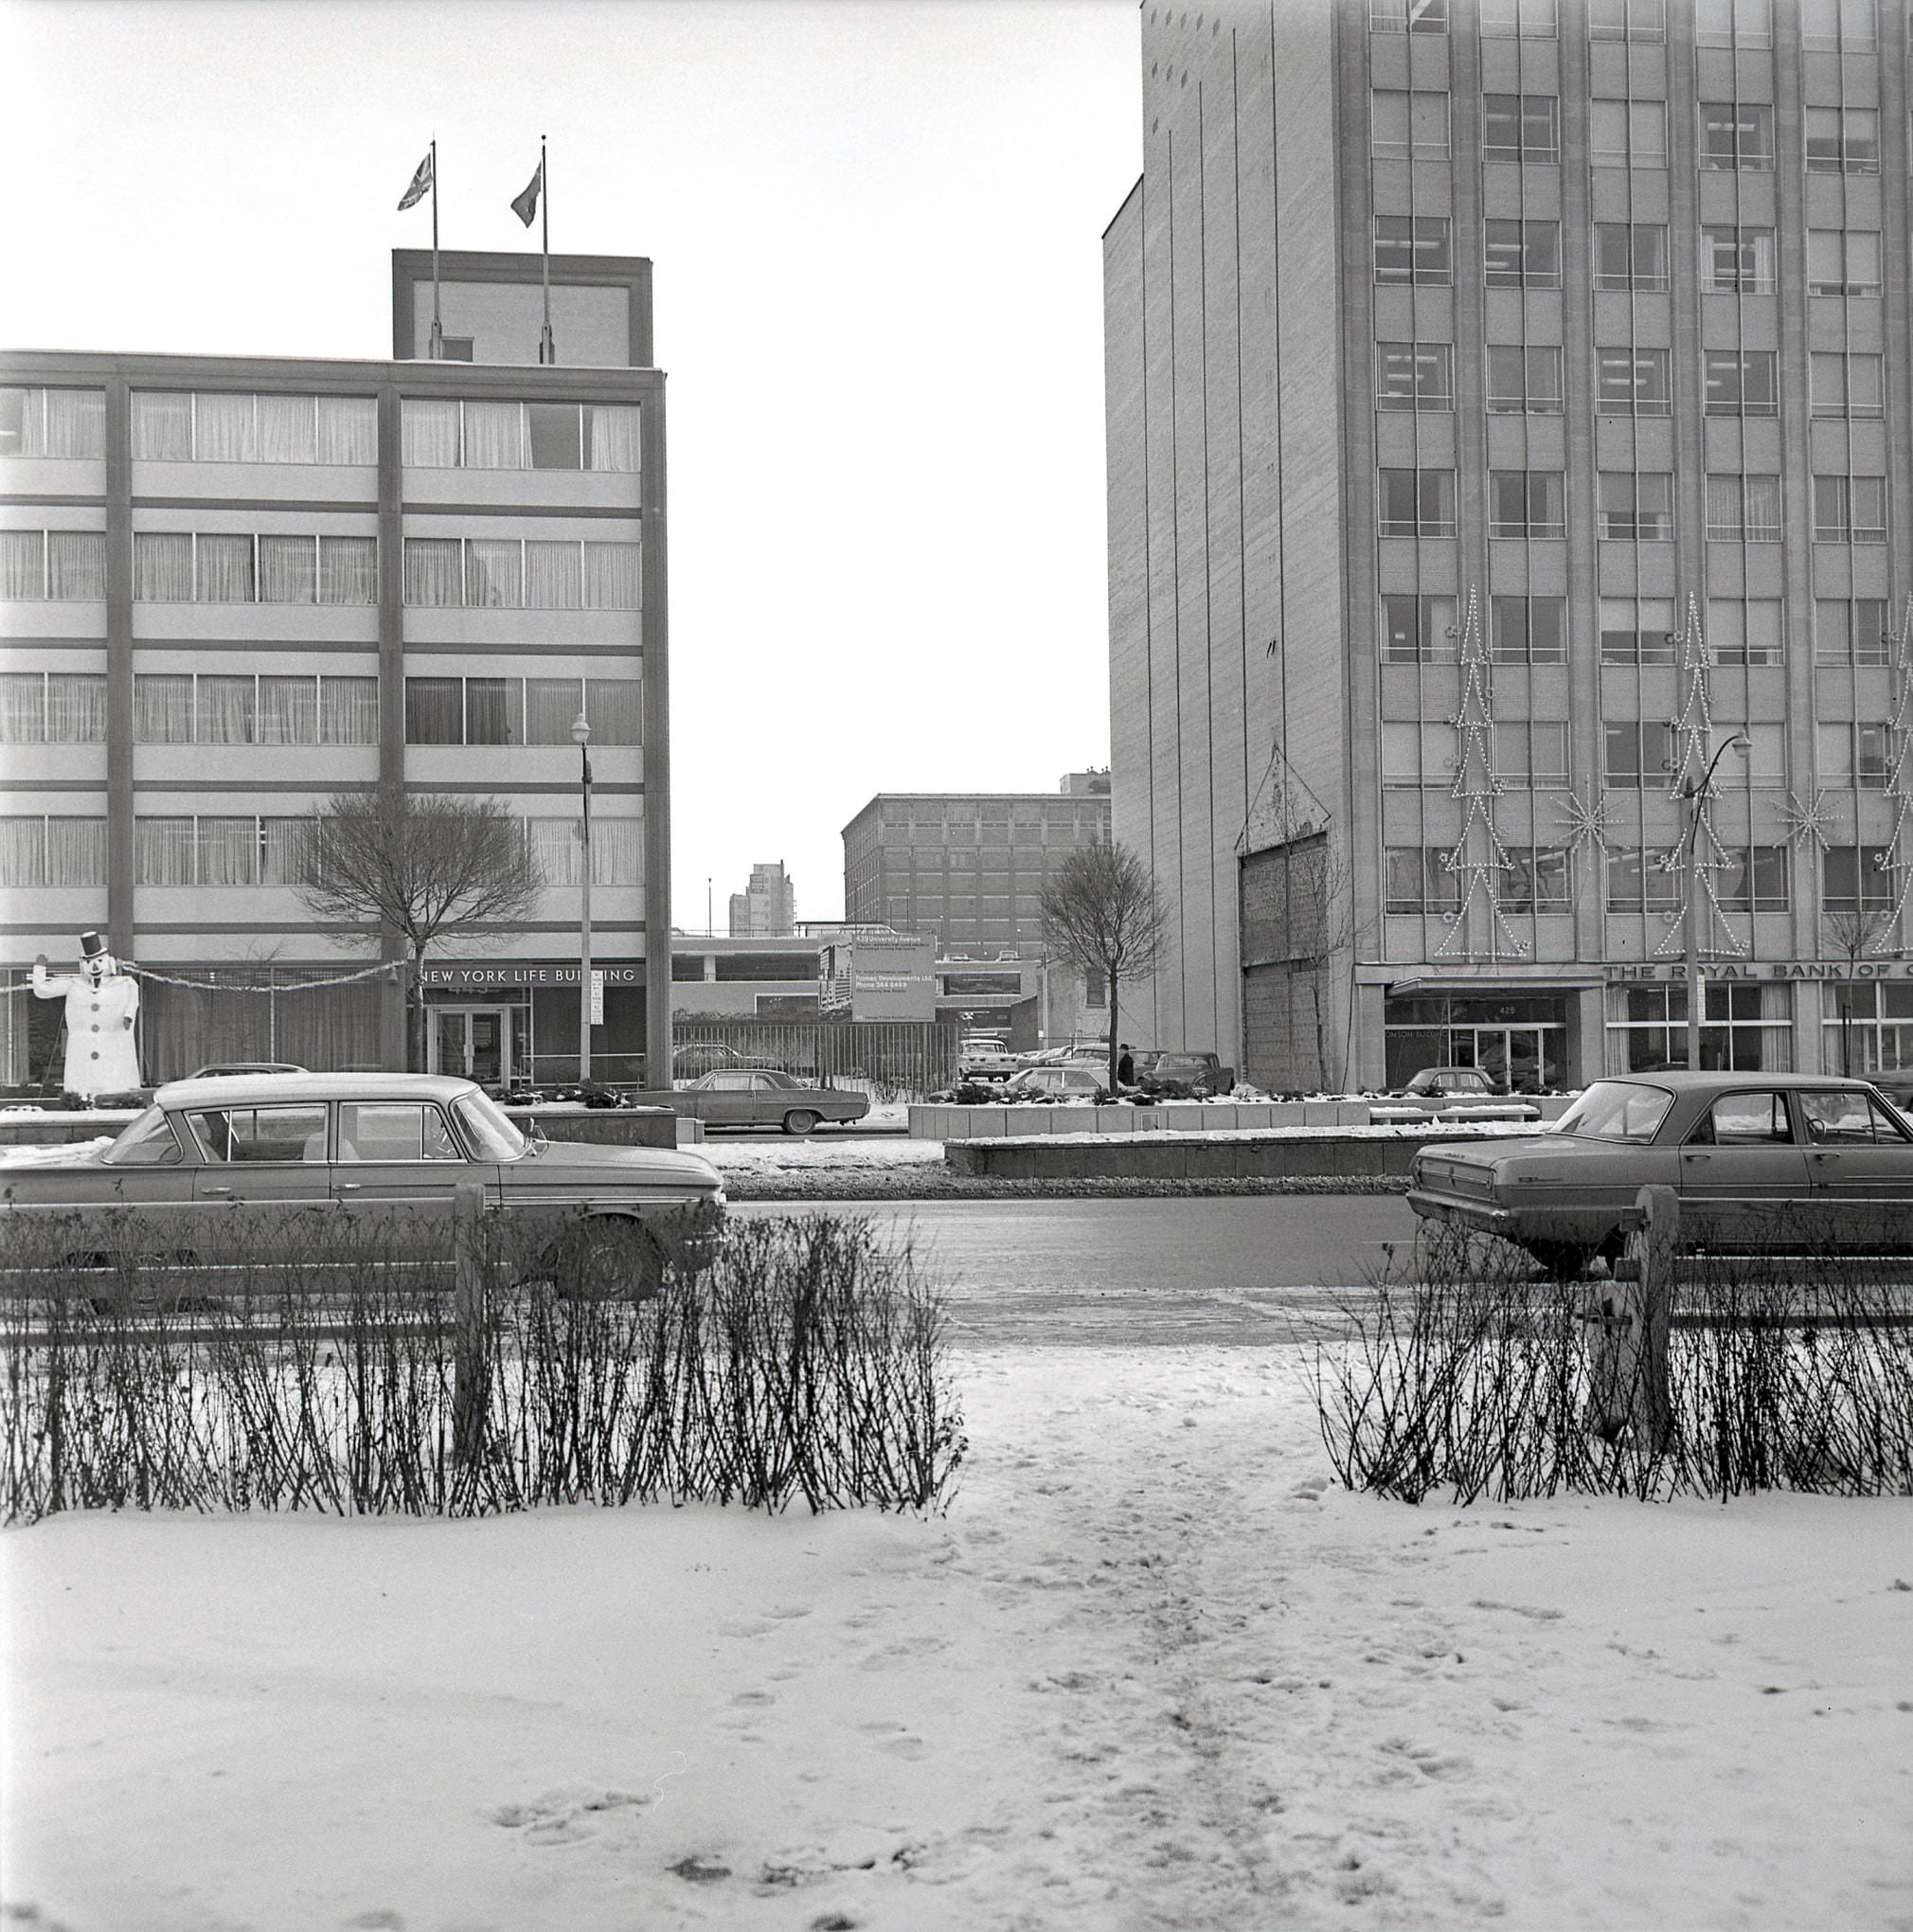 The gap between the buildings is 439 University Ave (east side of the street, south of Dundas), 1964.